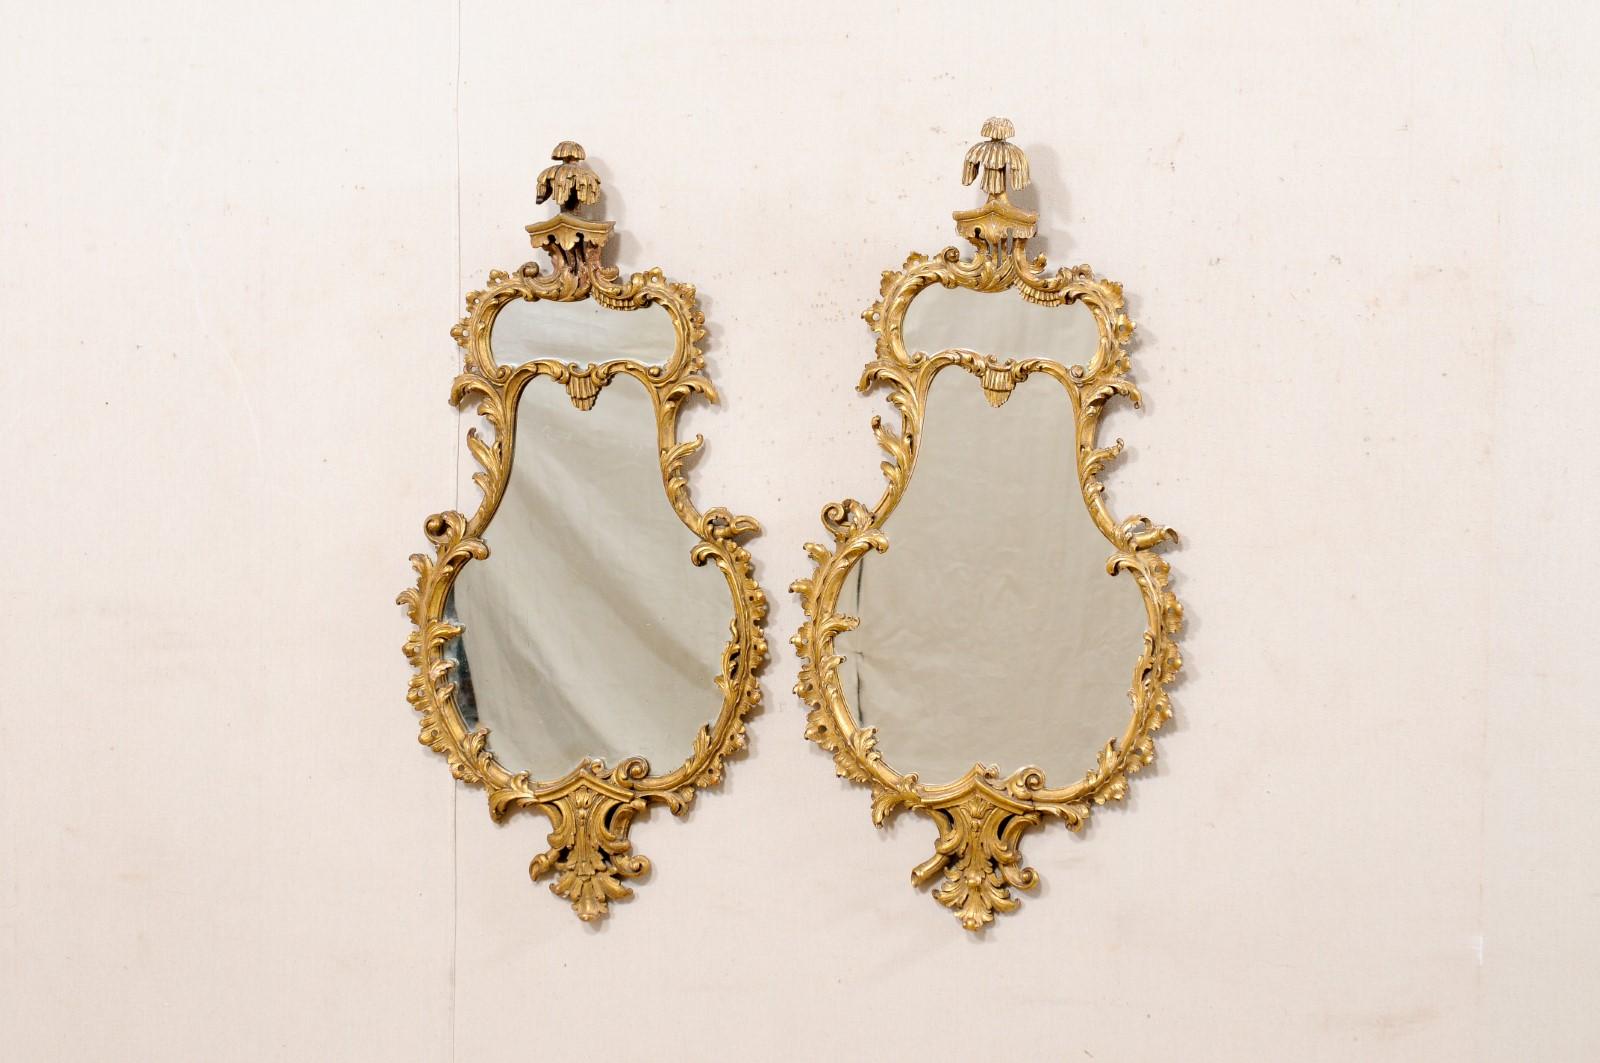 Italian Pair of Shapely Gilt Wood Wall Mirrors, Carved in Rococo Style, Mid 20th In Good Condition For Sale In Atlanta, GA